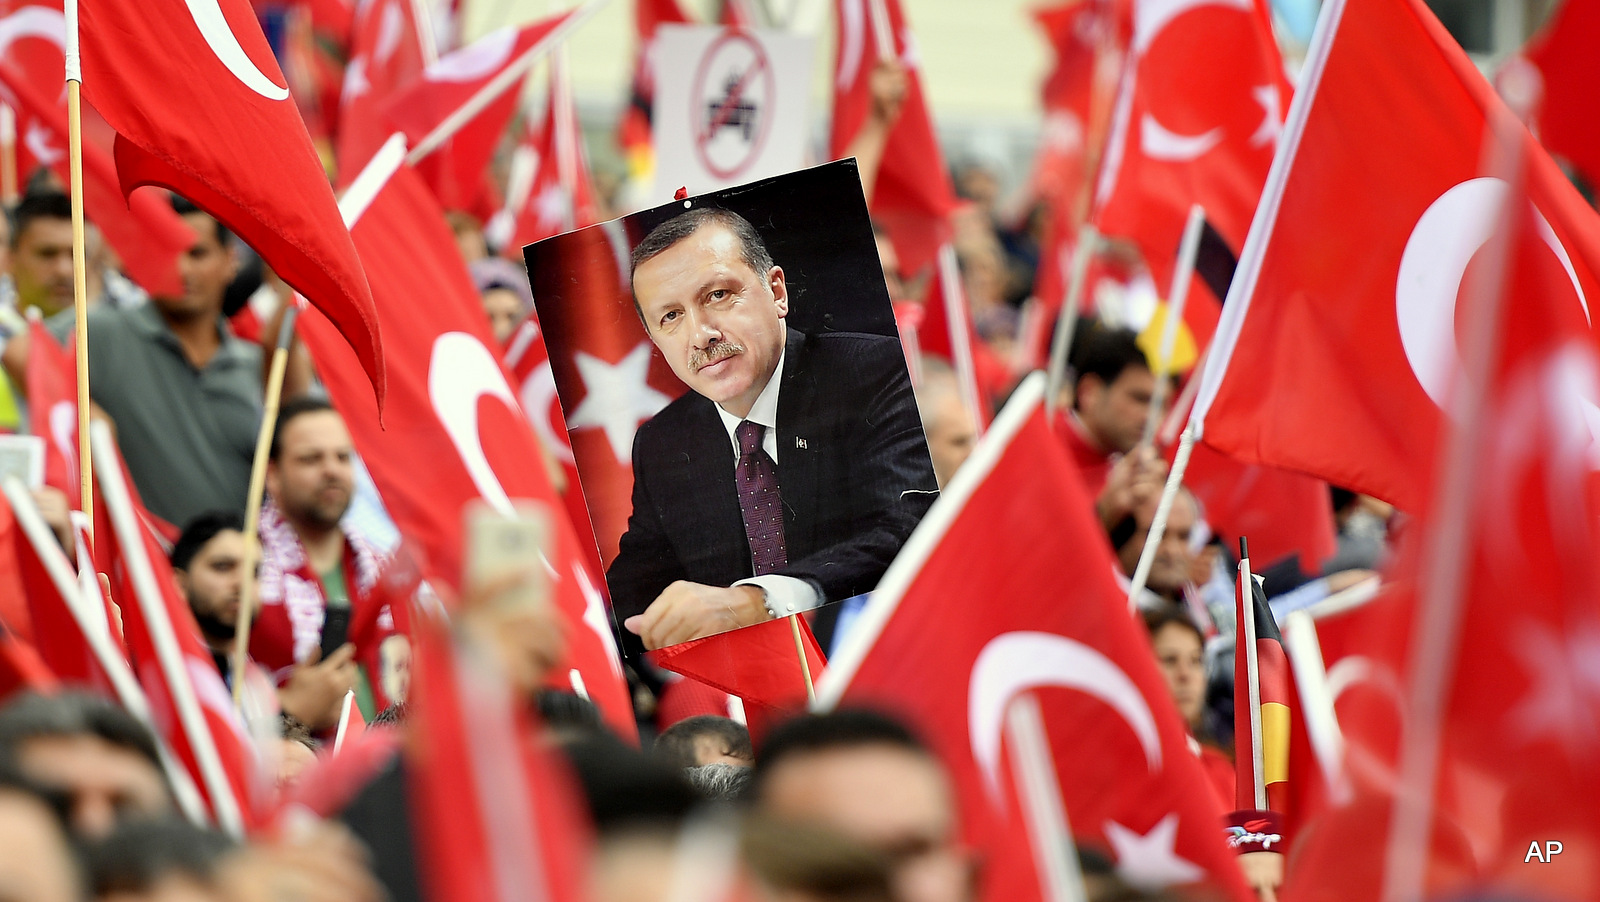 A picture of Turkish president Erdogan is framed by national flags during a demonstration in Cologne, Germany, Sunday, July 31, 2016. Thousands of supporters of Turkish President Recep Tayyip Erdogan gather in the German city of Cologne for a demonstration against the failed July 15 coup in Turkey.